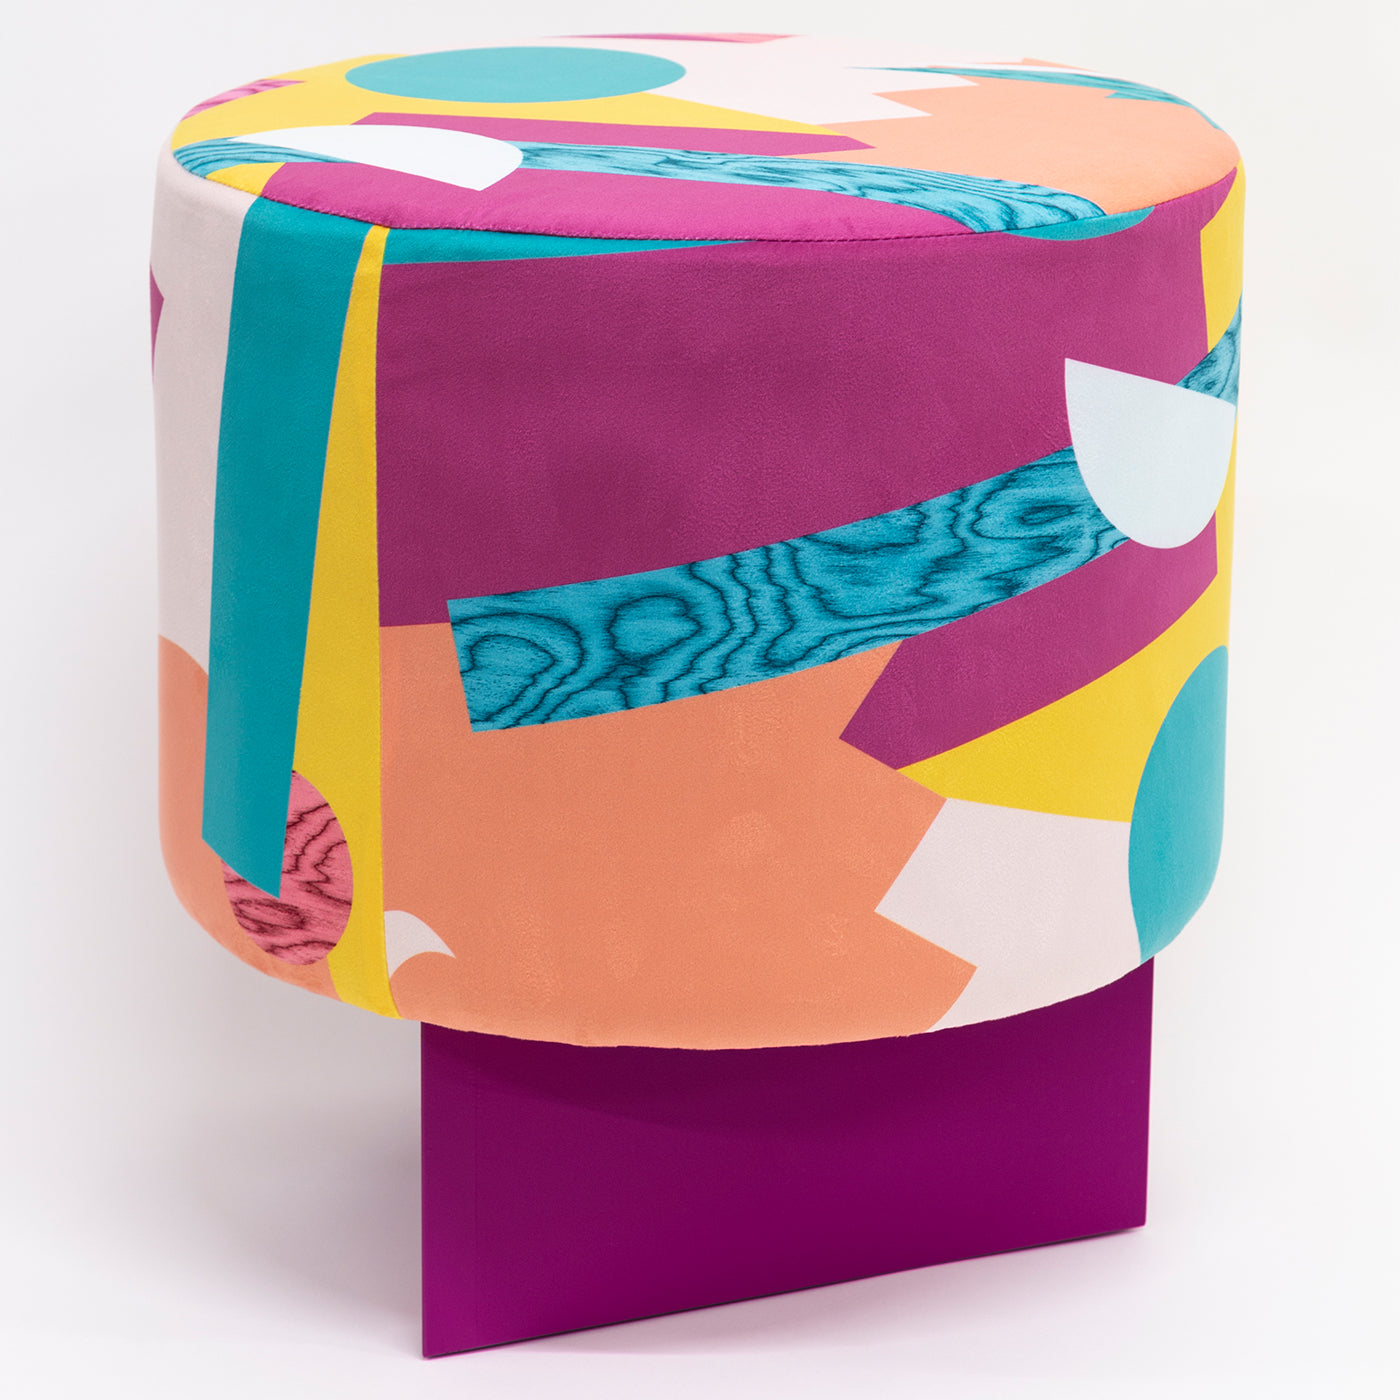 Alchimie Abstract Decor Velvet and MDF Pouf #2 - Alternative view 1